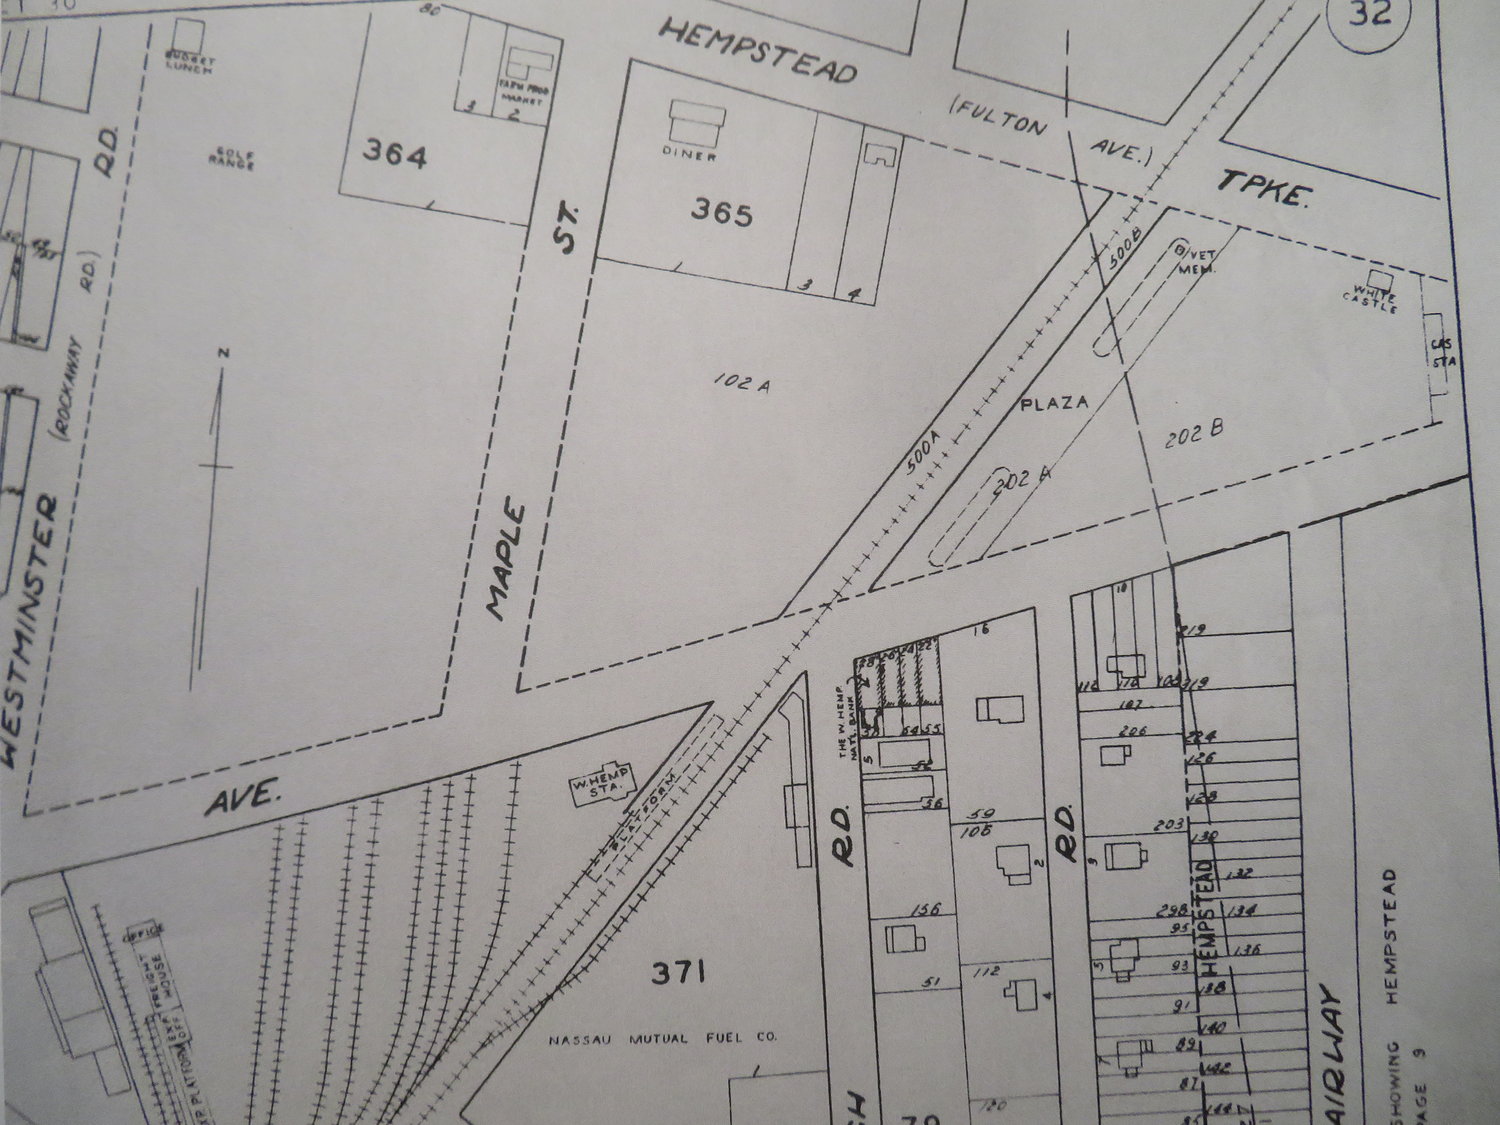 A 1944 map shows that the block housing the property formerly owned by NWL featured a lunch shop, golf range and farmer’s market.